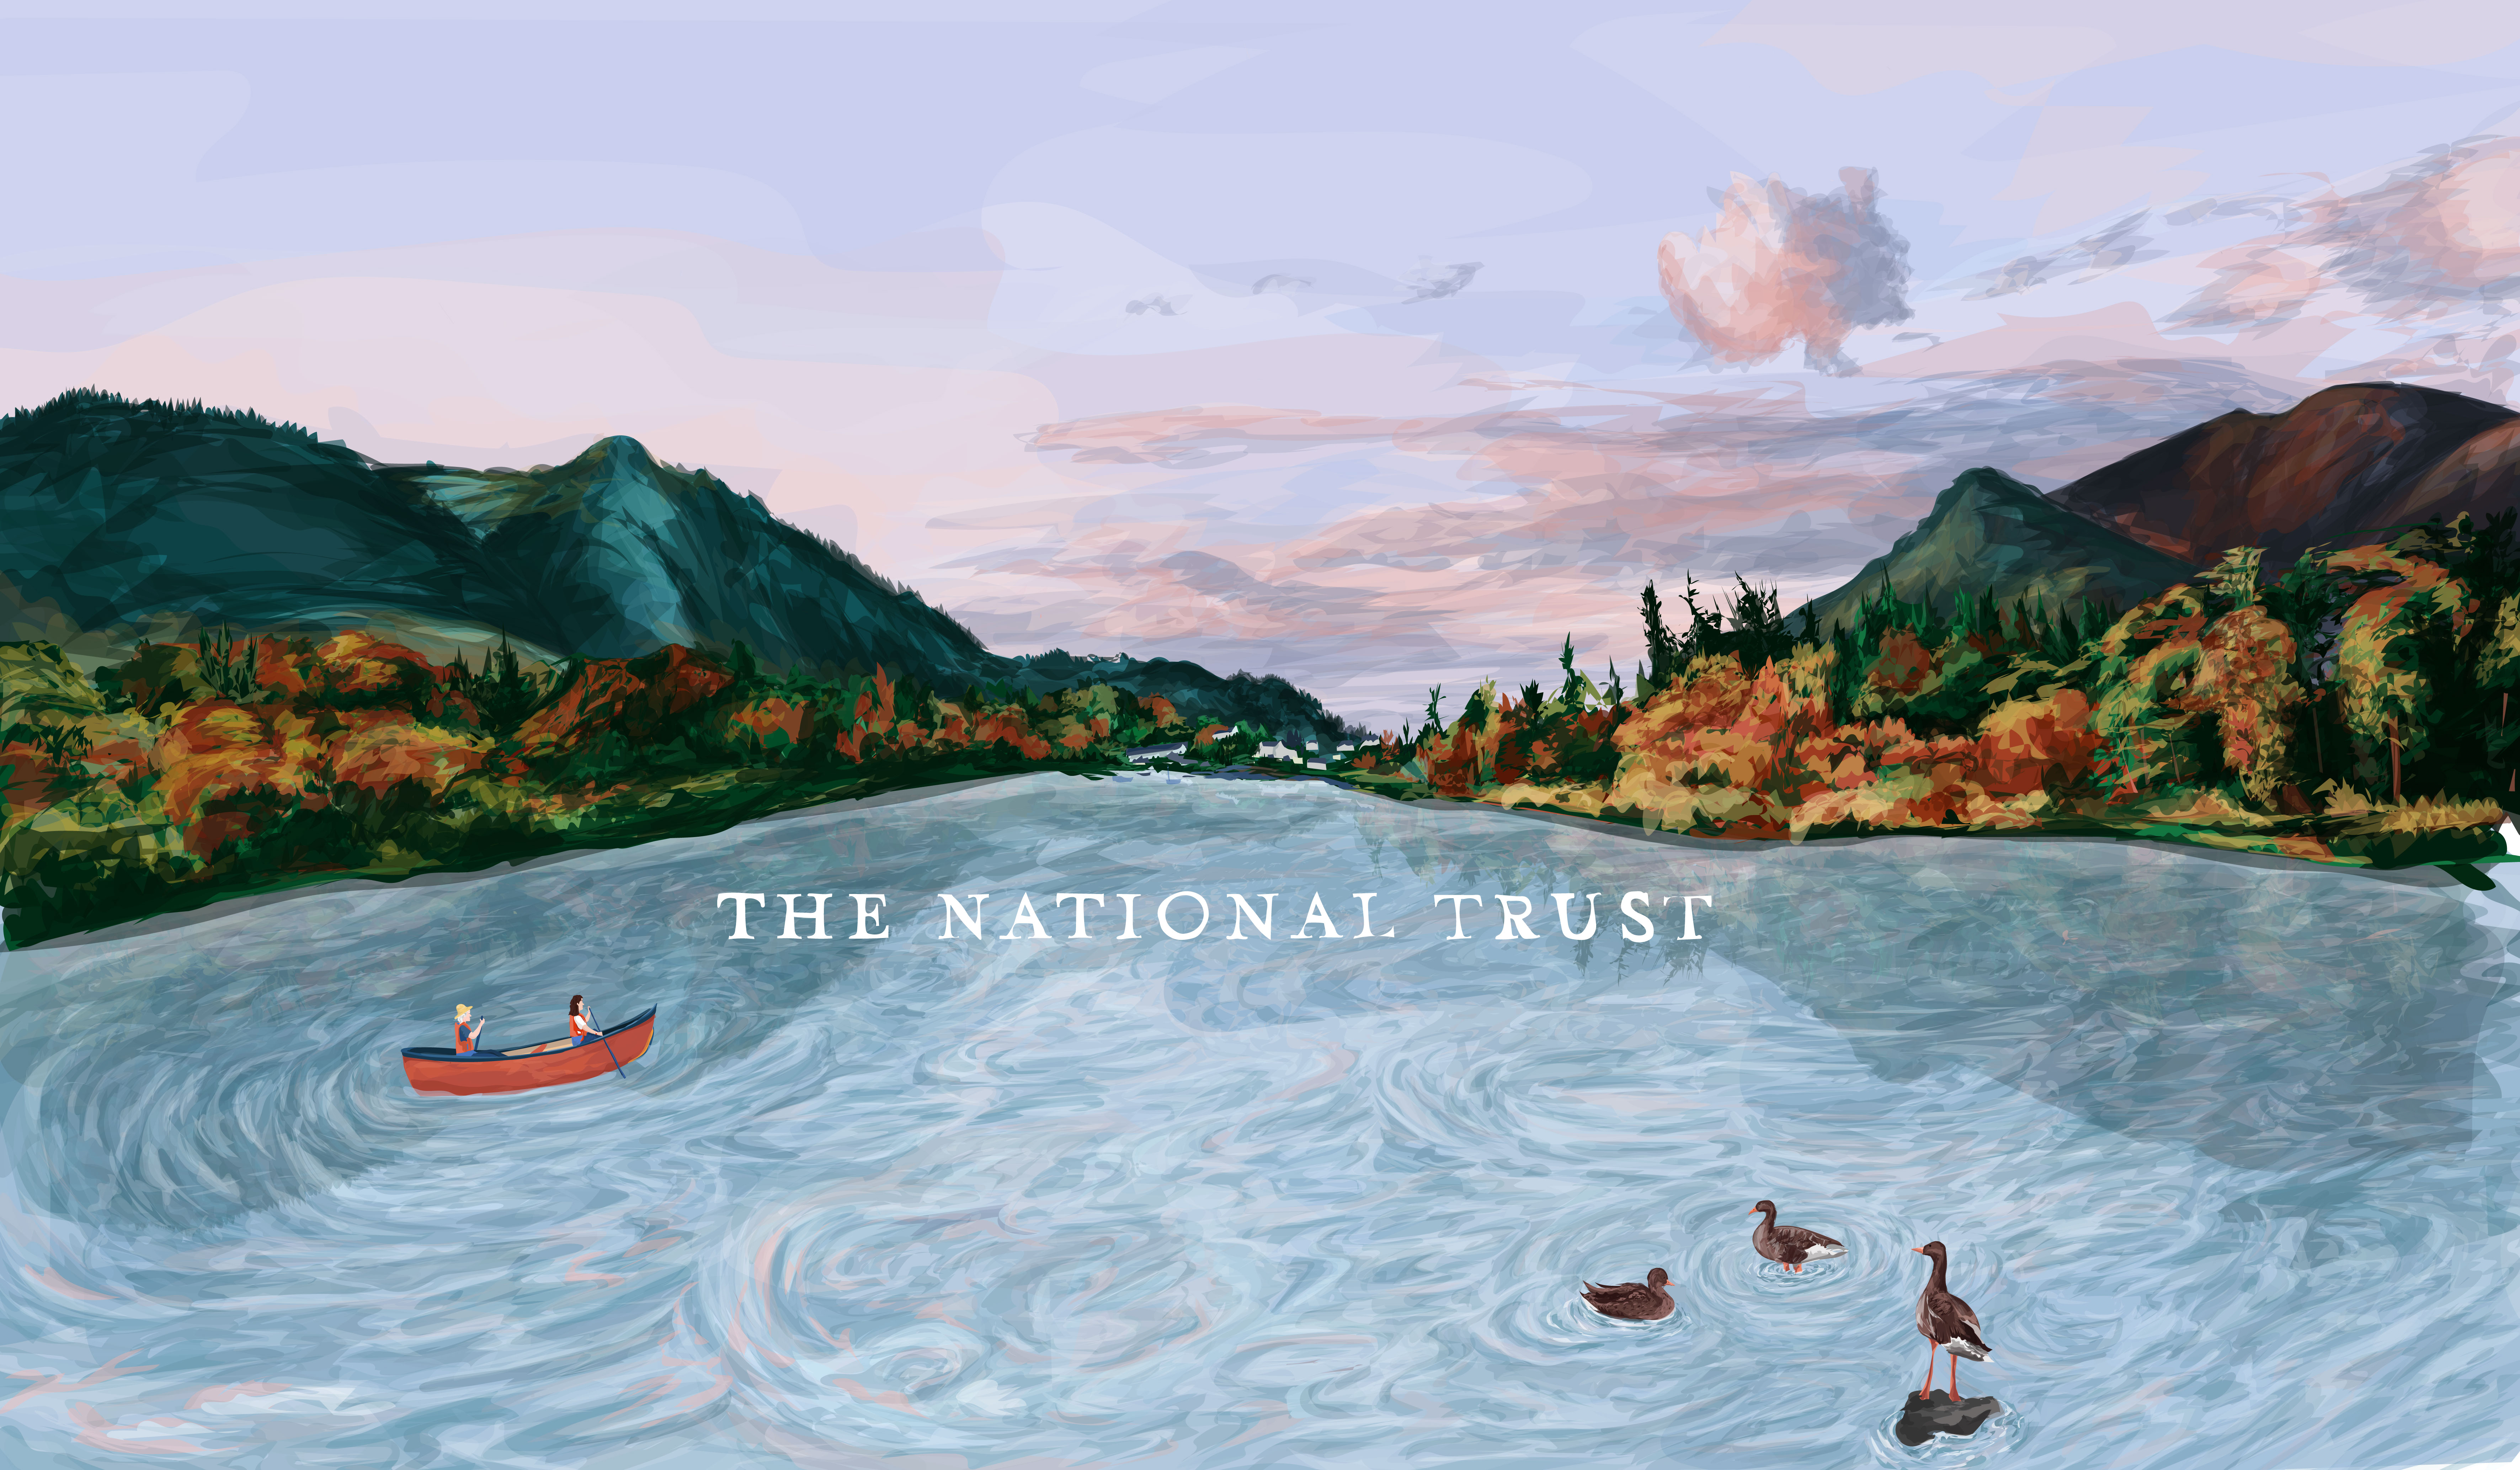 The National Trust, speculative campaign 